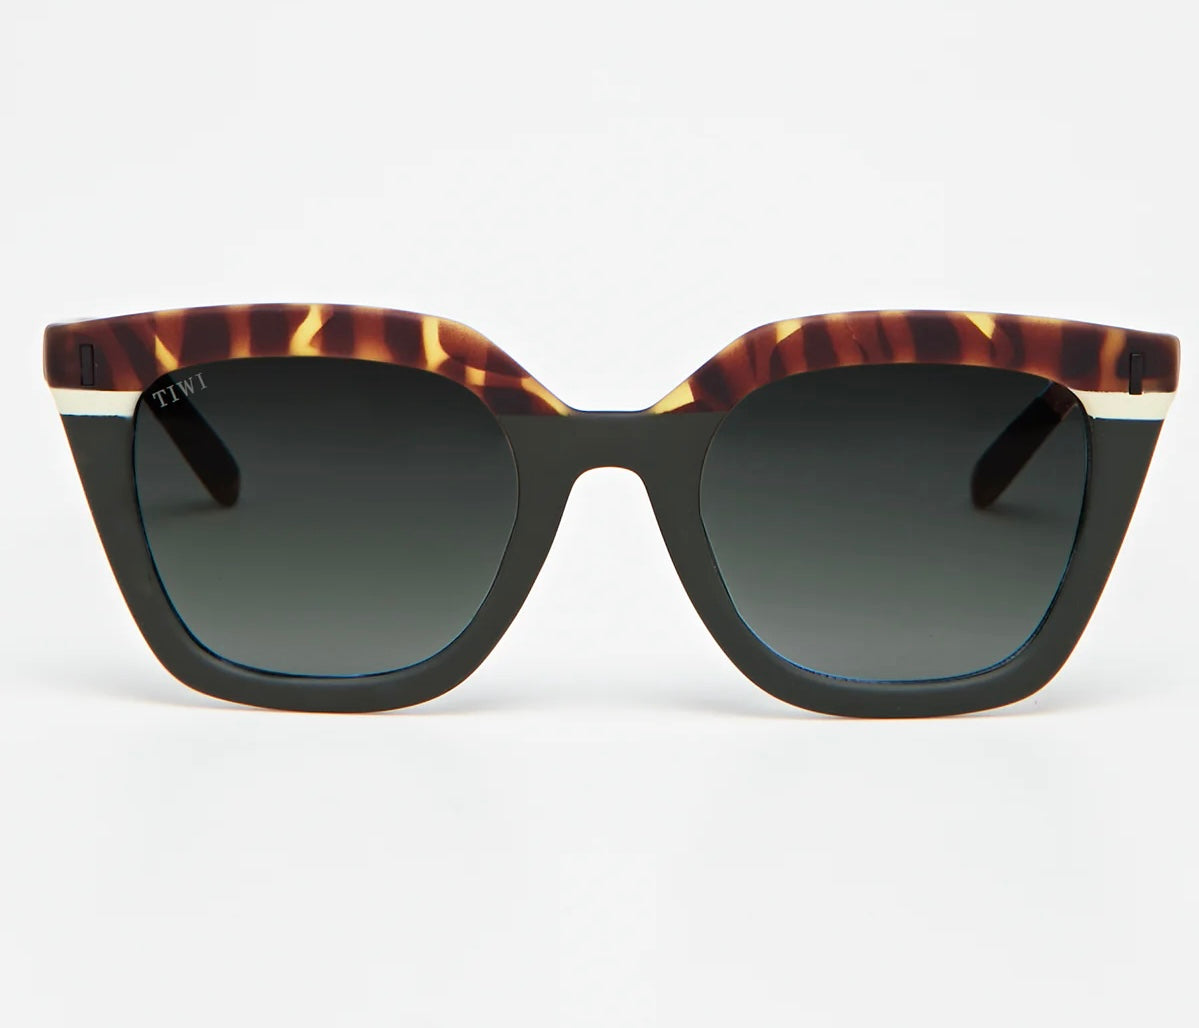 HALE Sunglasses Available in more colors Tricolor Green Tortoise/Green/Beige  